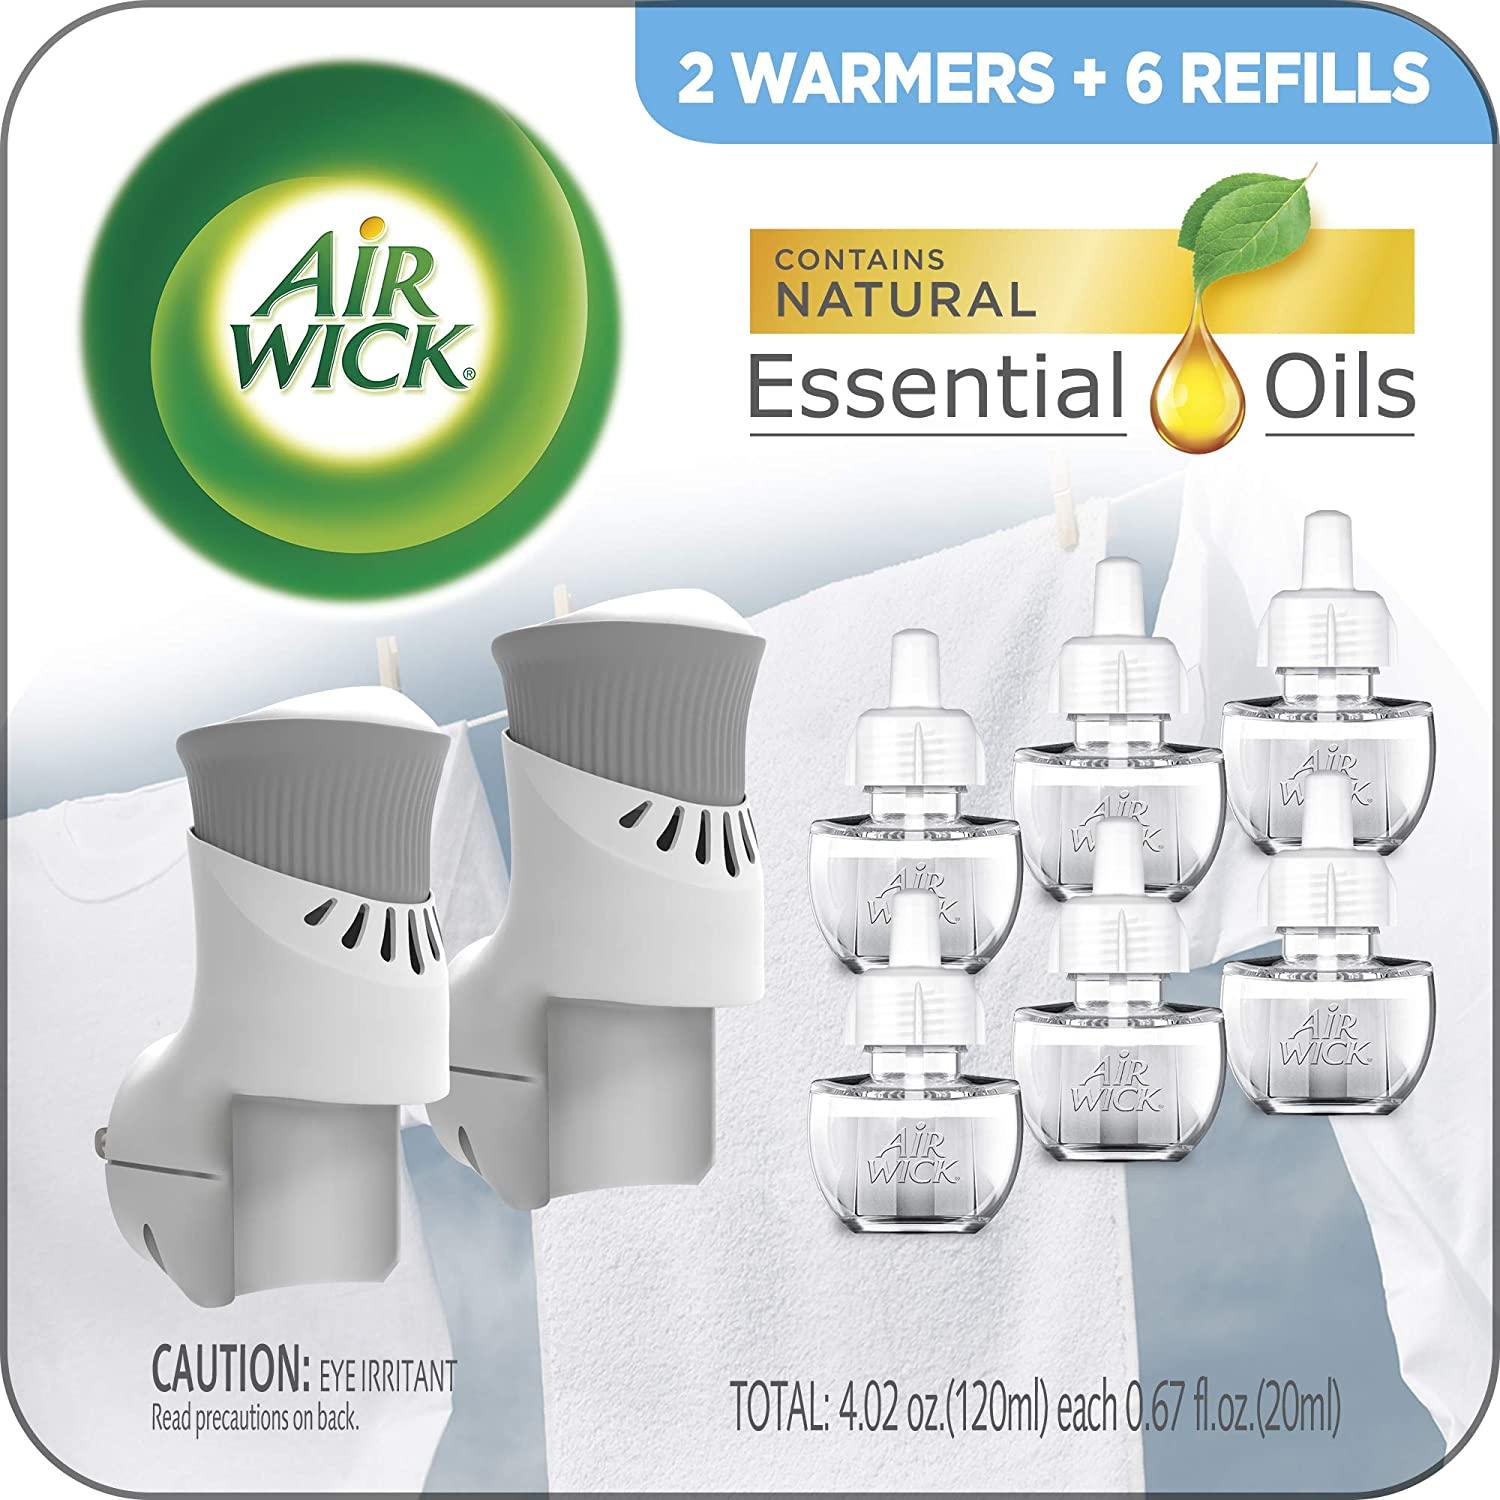 Air Wick Plug in Scented Oil Starter Kit 2 Warmers for $10.49